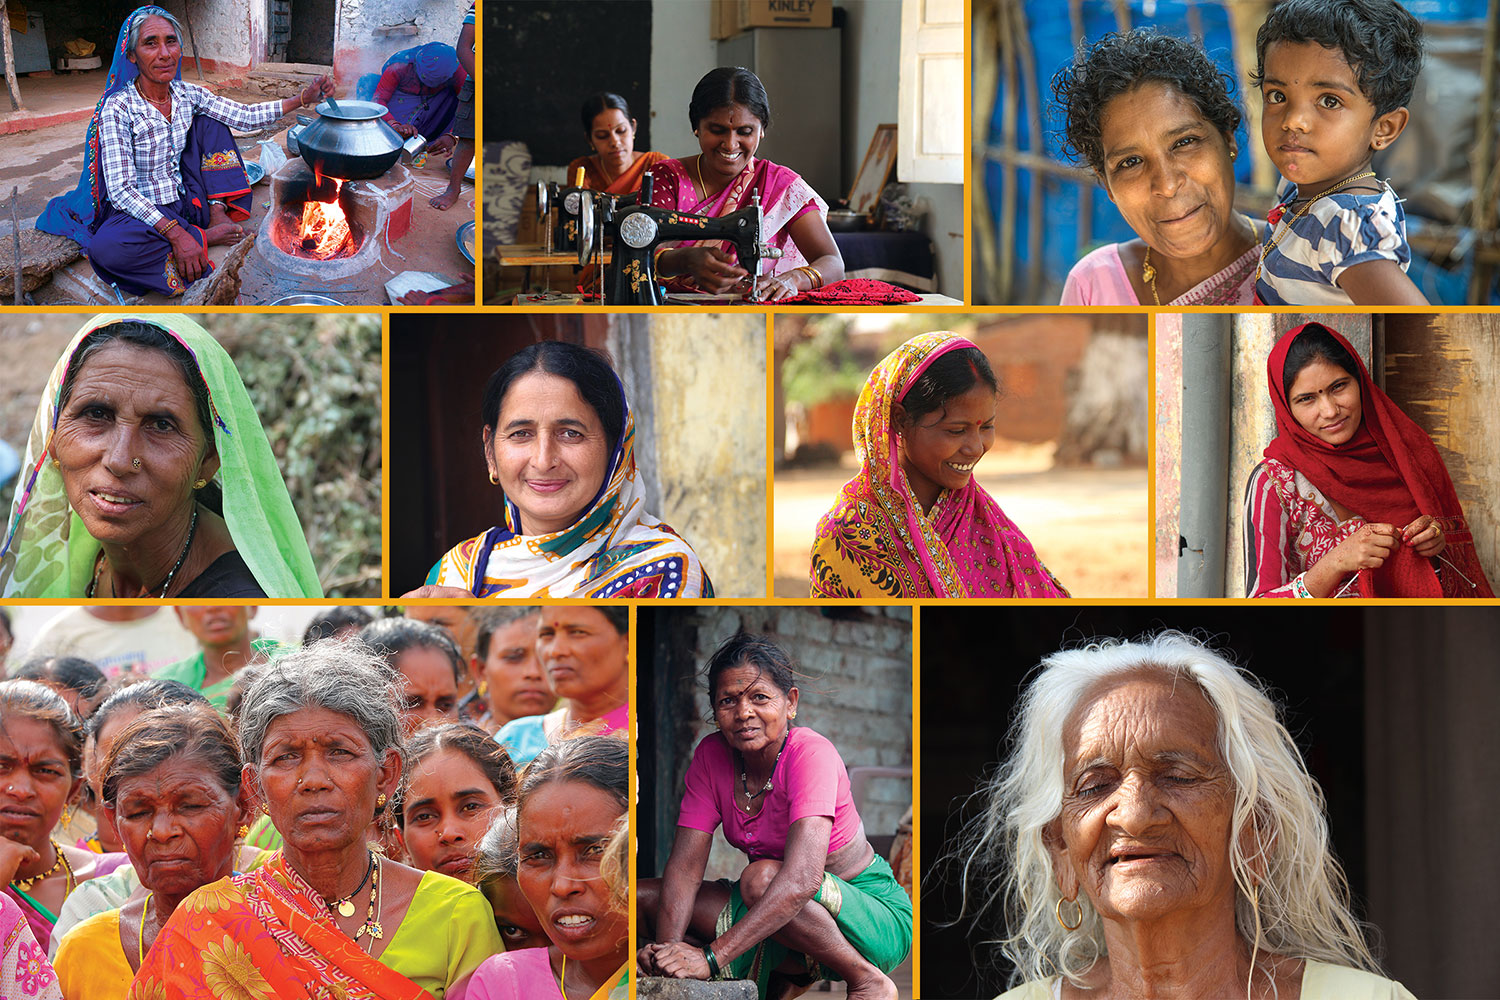 Collage of faces of Indian women of different ages and lifestyles